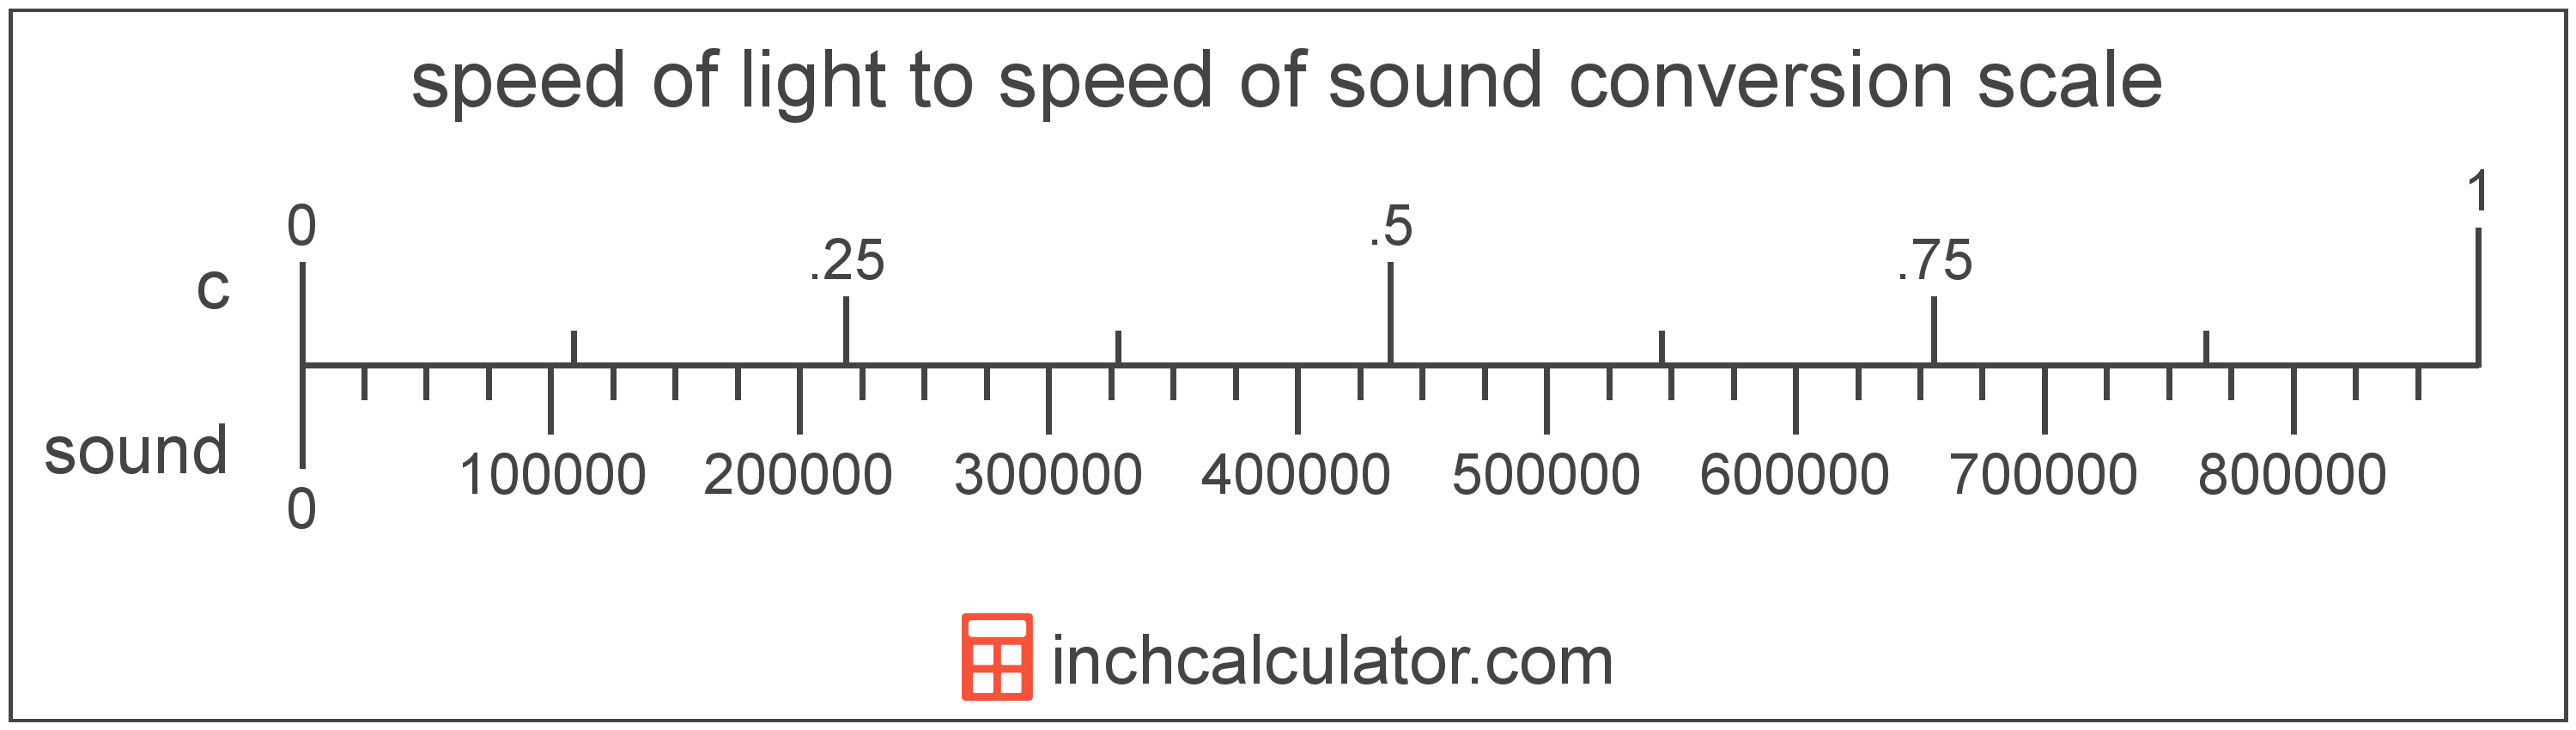 conversion scale showing speed of sound and equivalent speed of light speed values